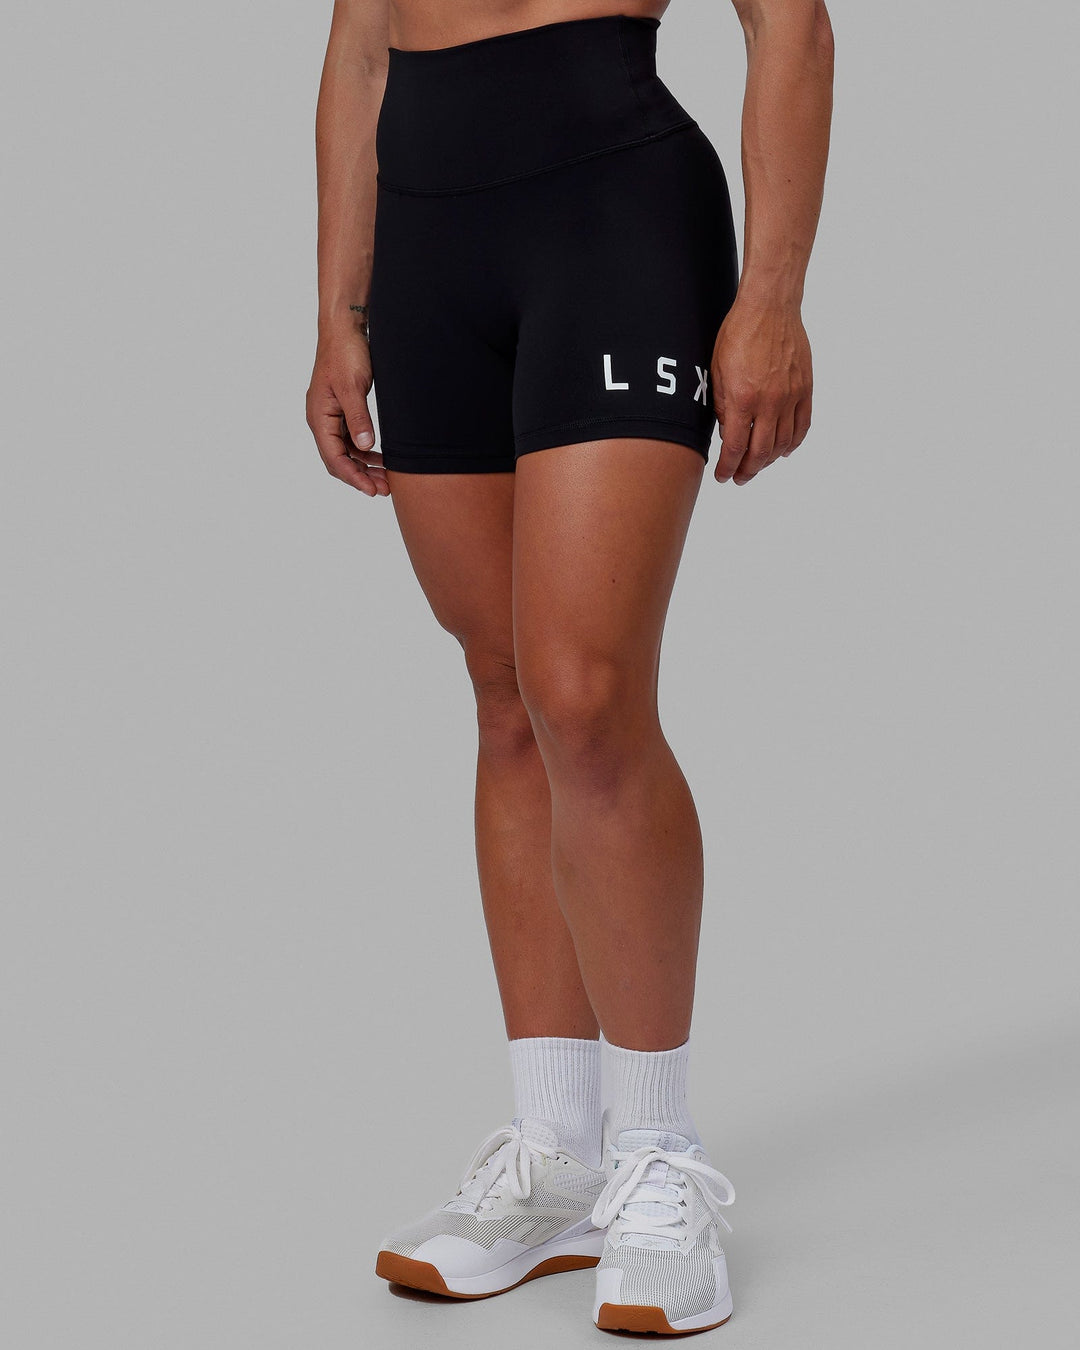 Woman wearing Evolved X-Short Tights - Black-White